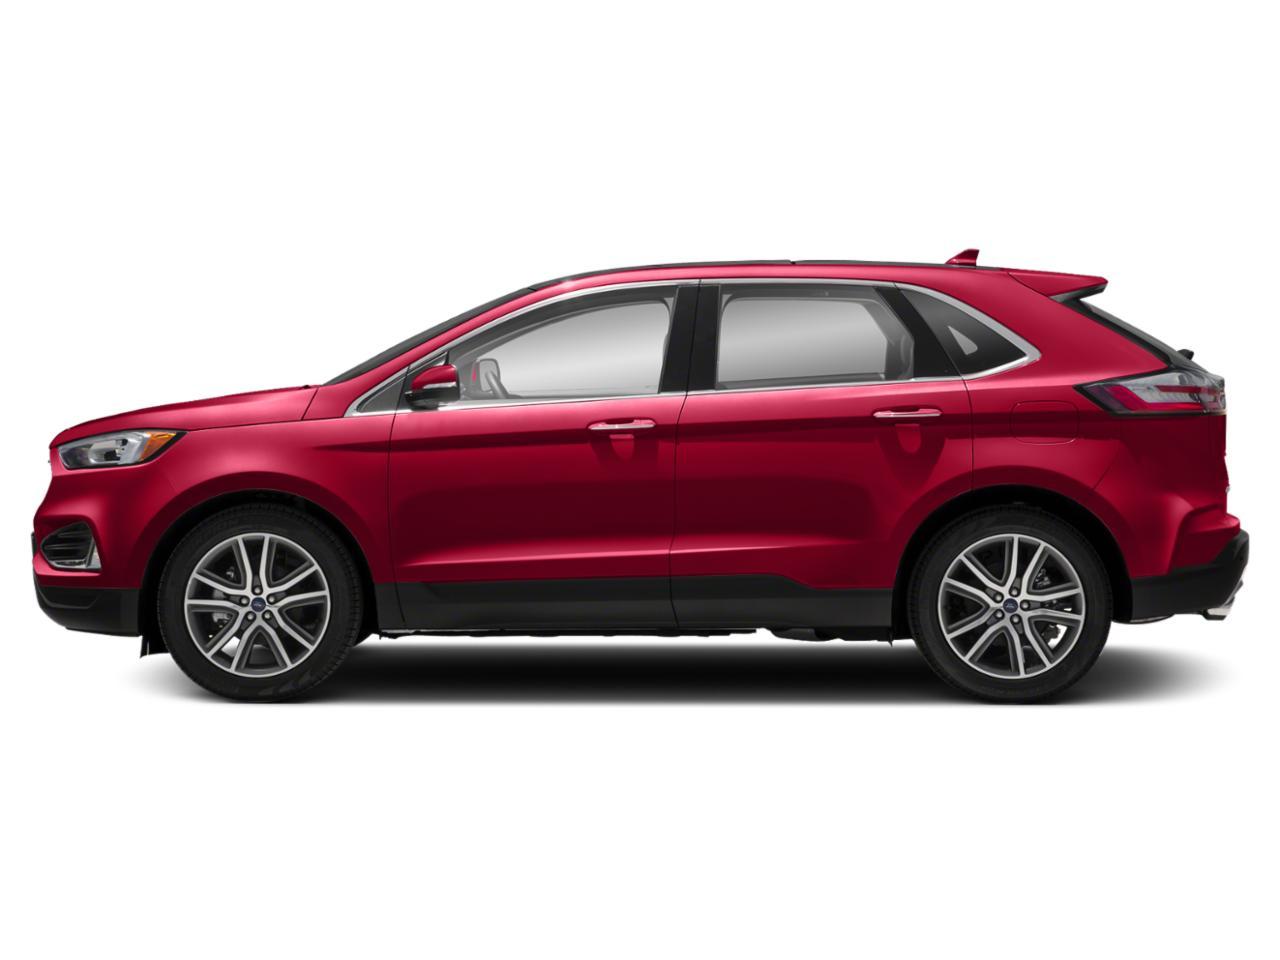 Used 2020 Ford Edge Titanium with VIN 2FMPK4K97LBB00252 for sale in Red Wing, Minnesota